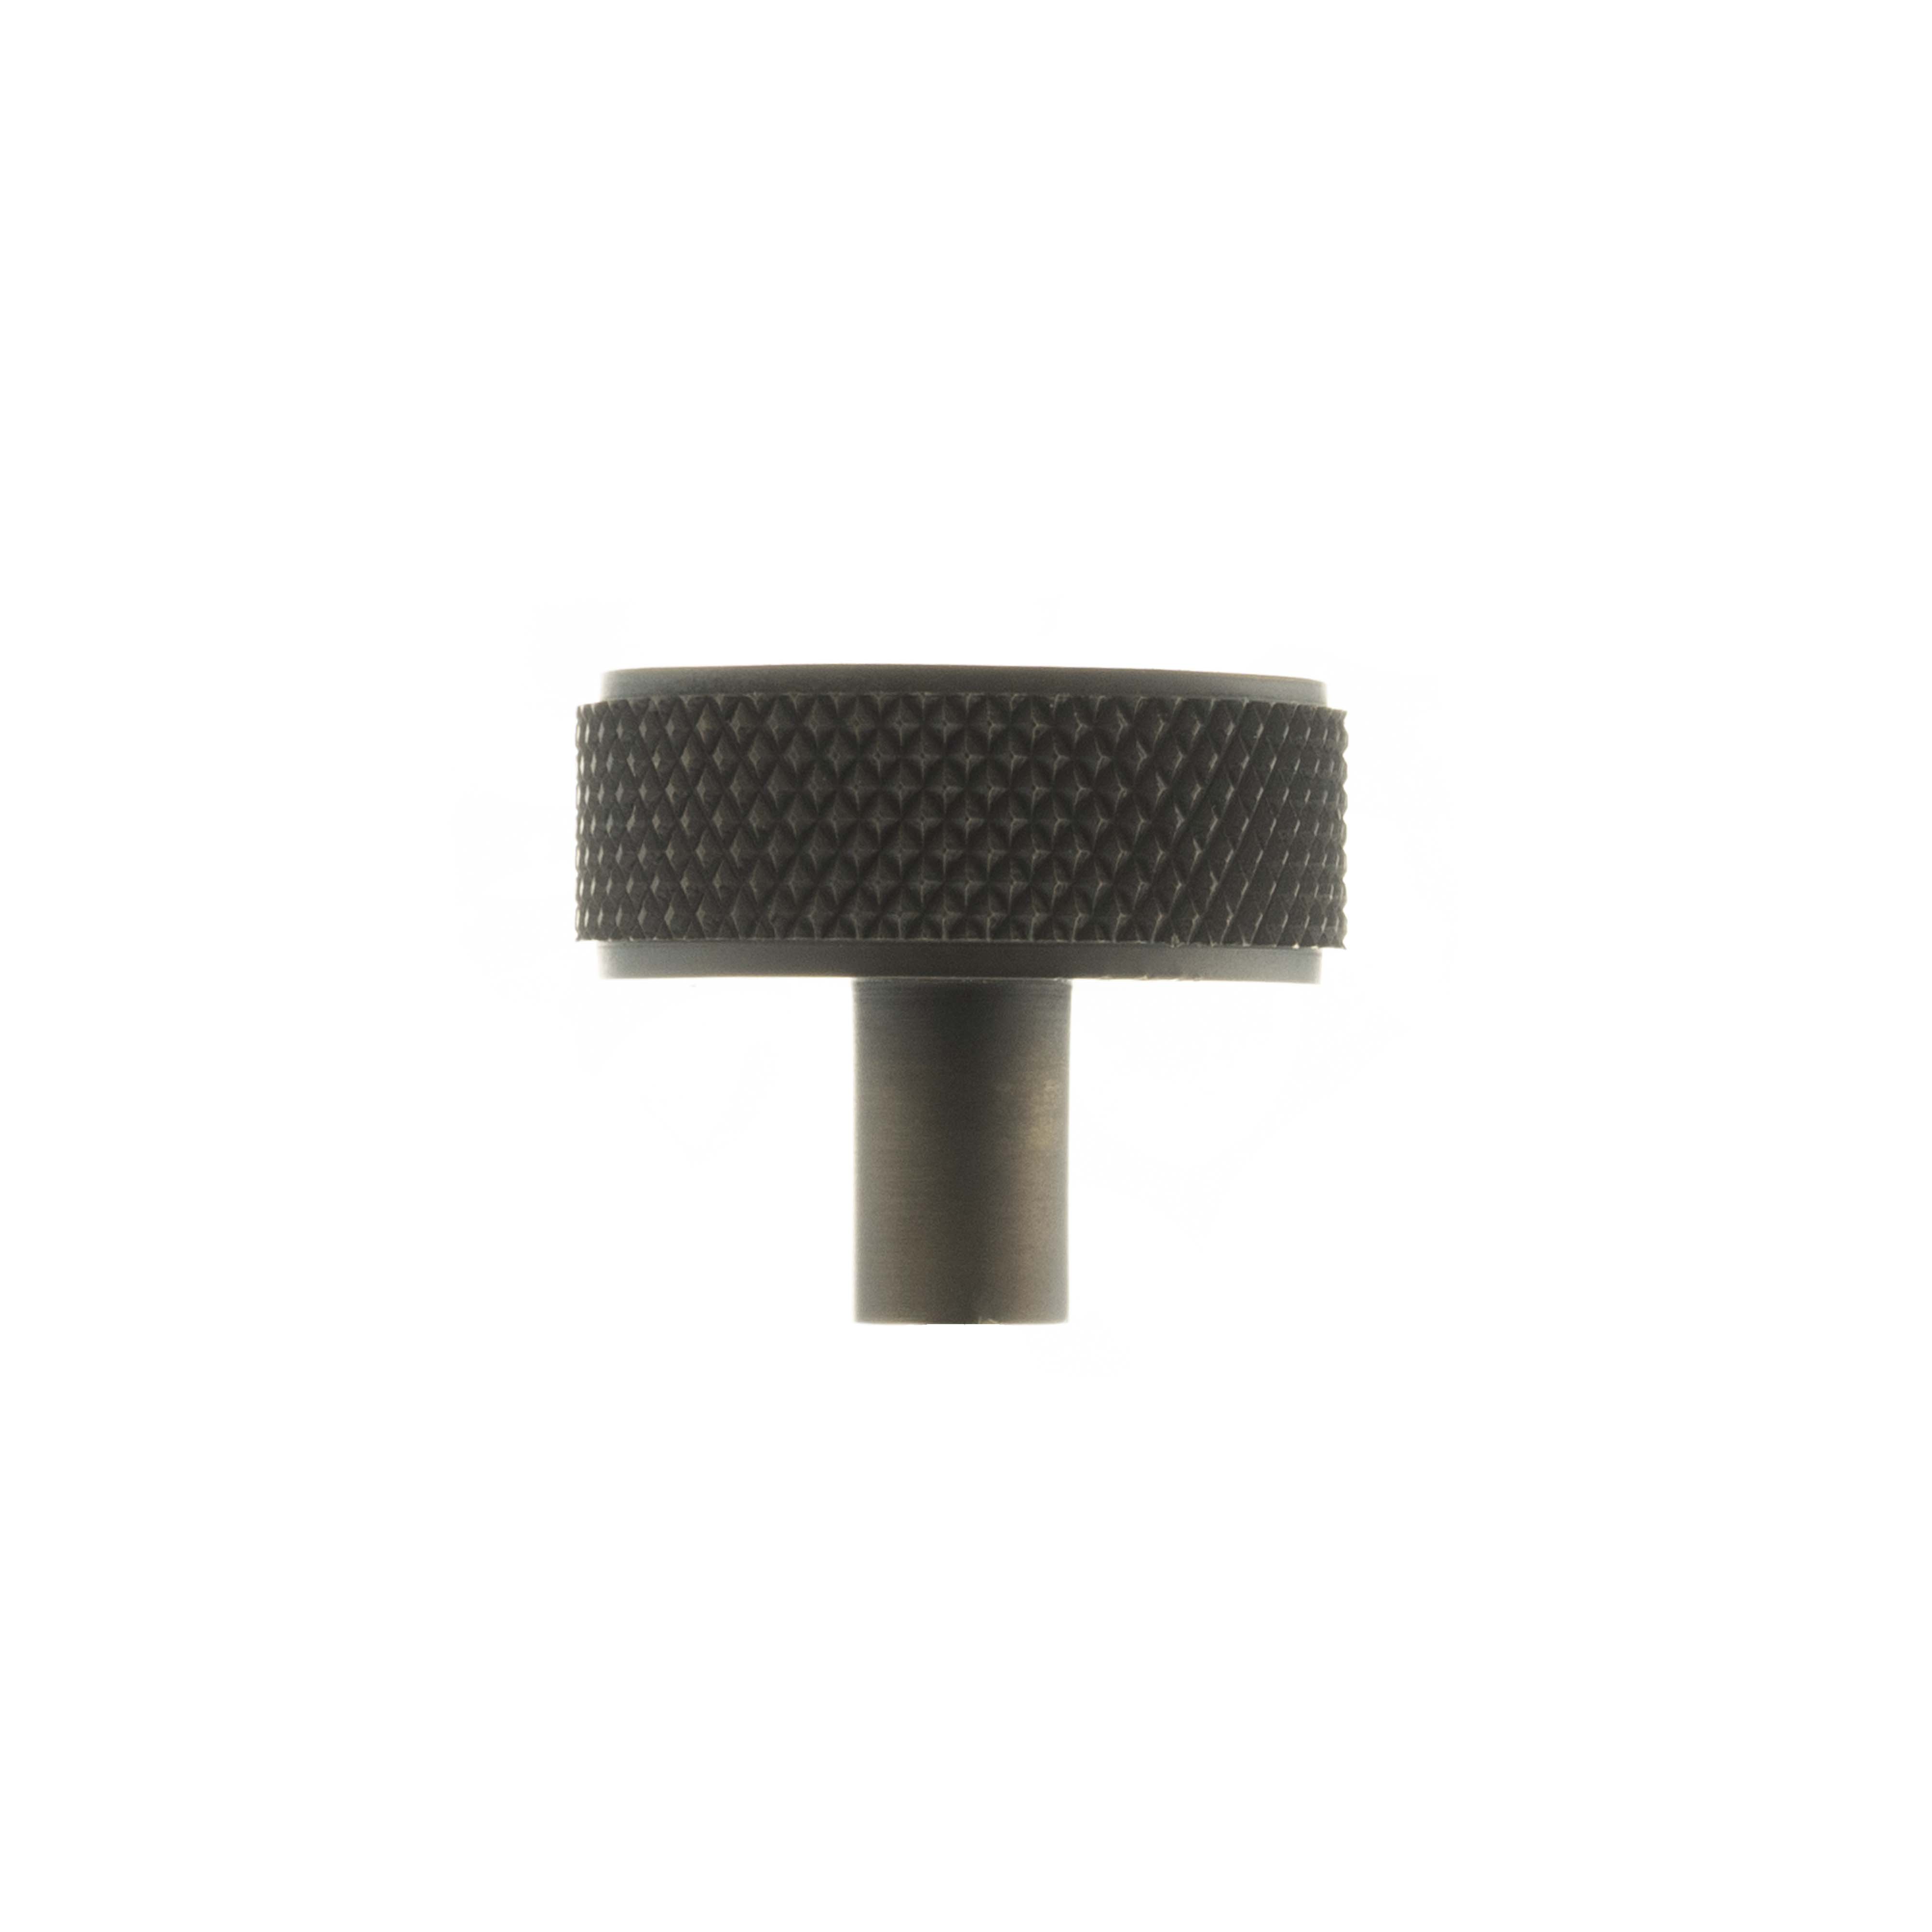 Millhouse Brass Hargreaves Disc Knurled Cabinet Knob on Concealed Fix - Urban Dark Bronze